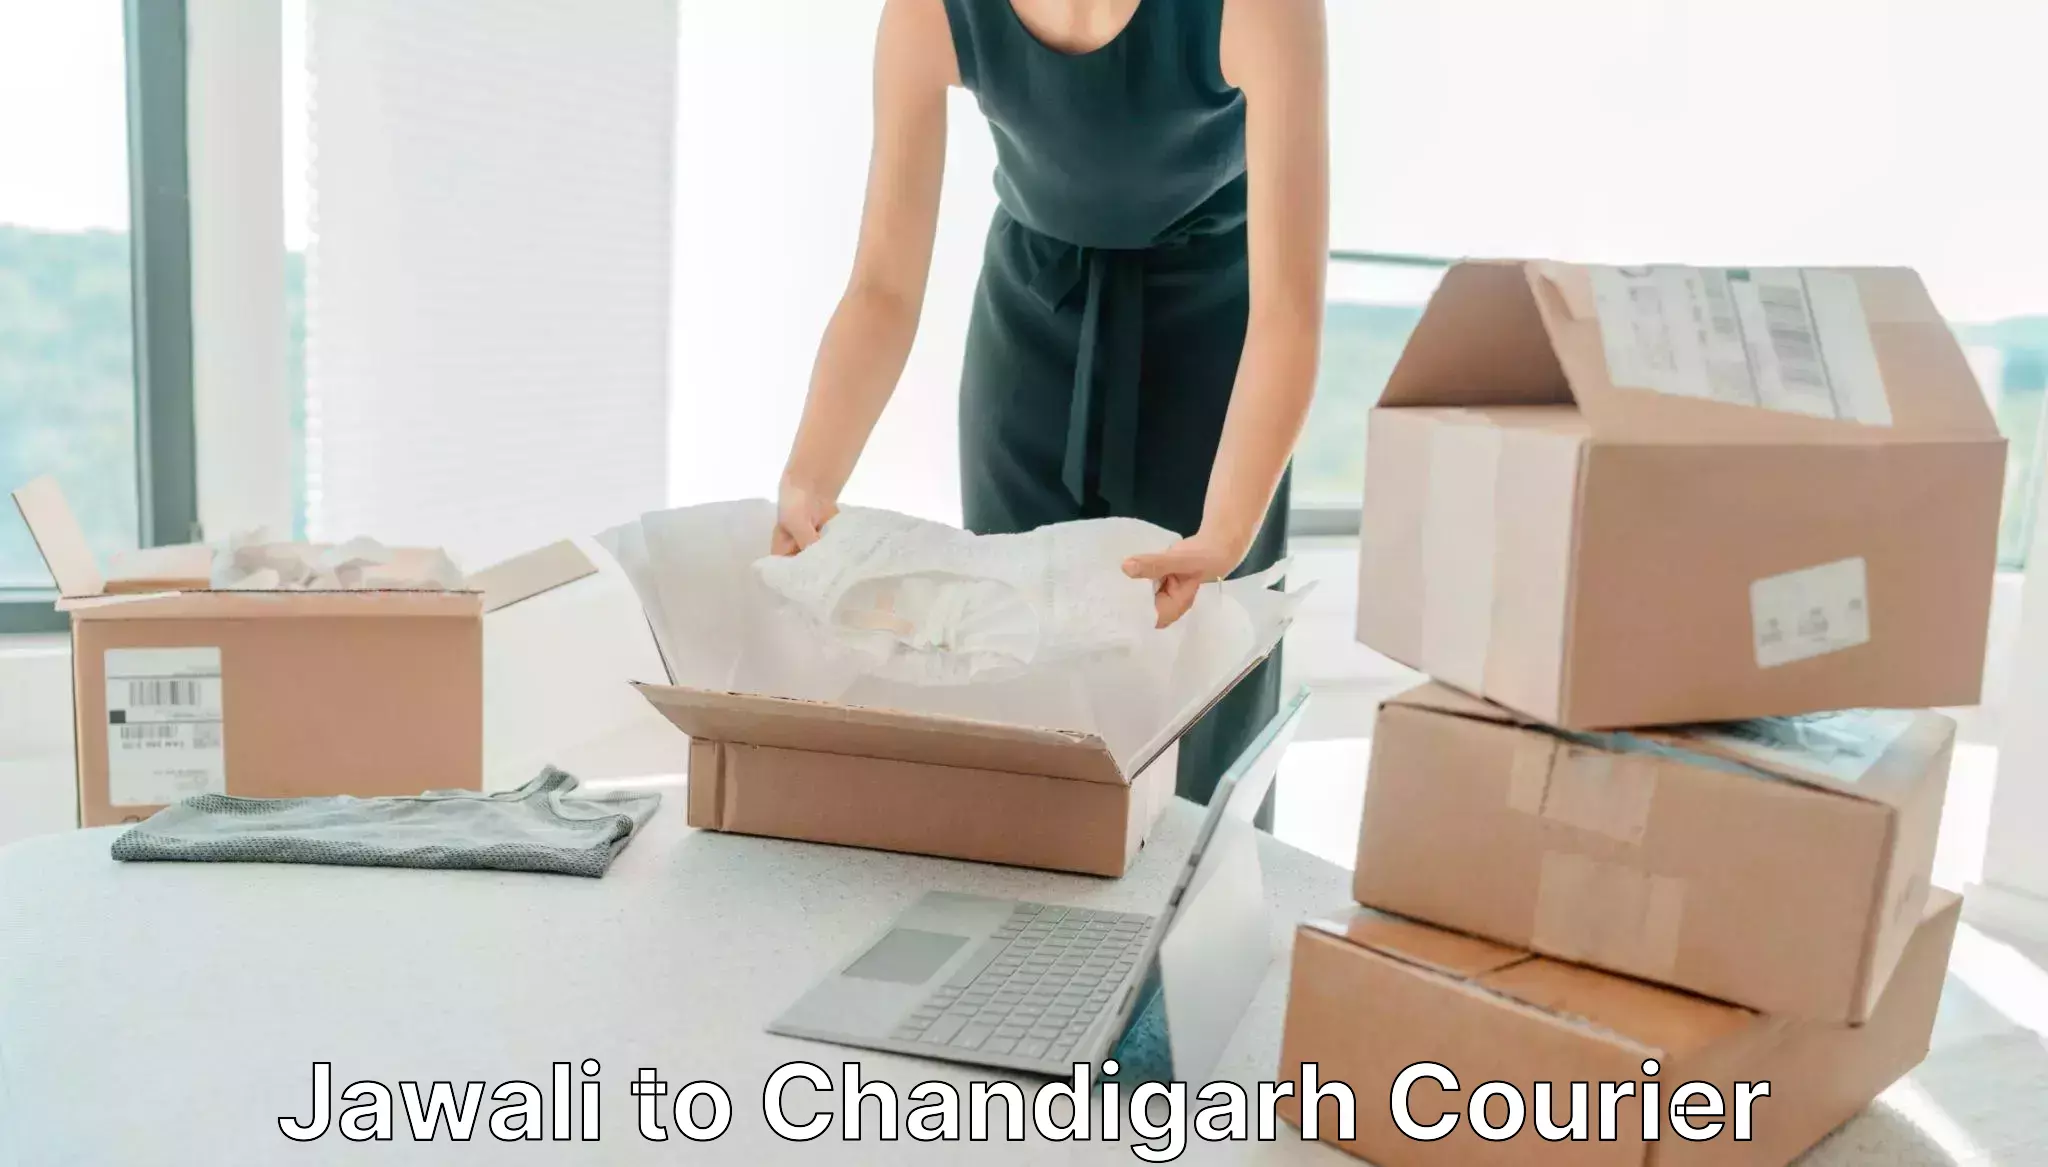 Easy access courier services Jawali to Chandigarh